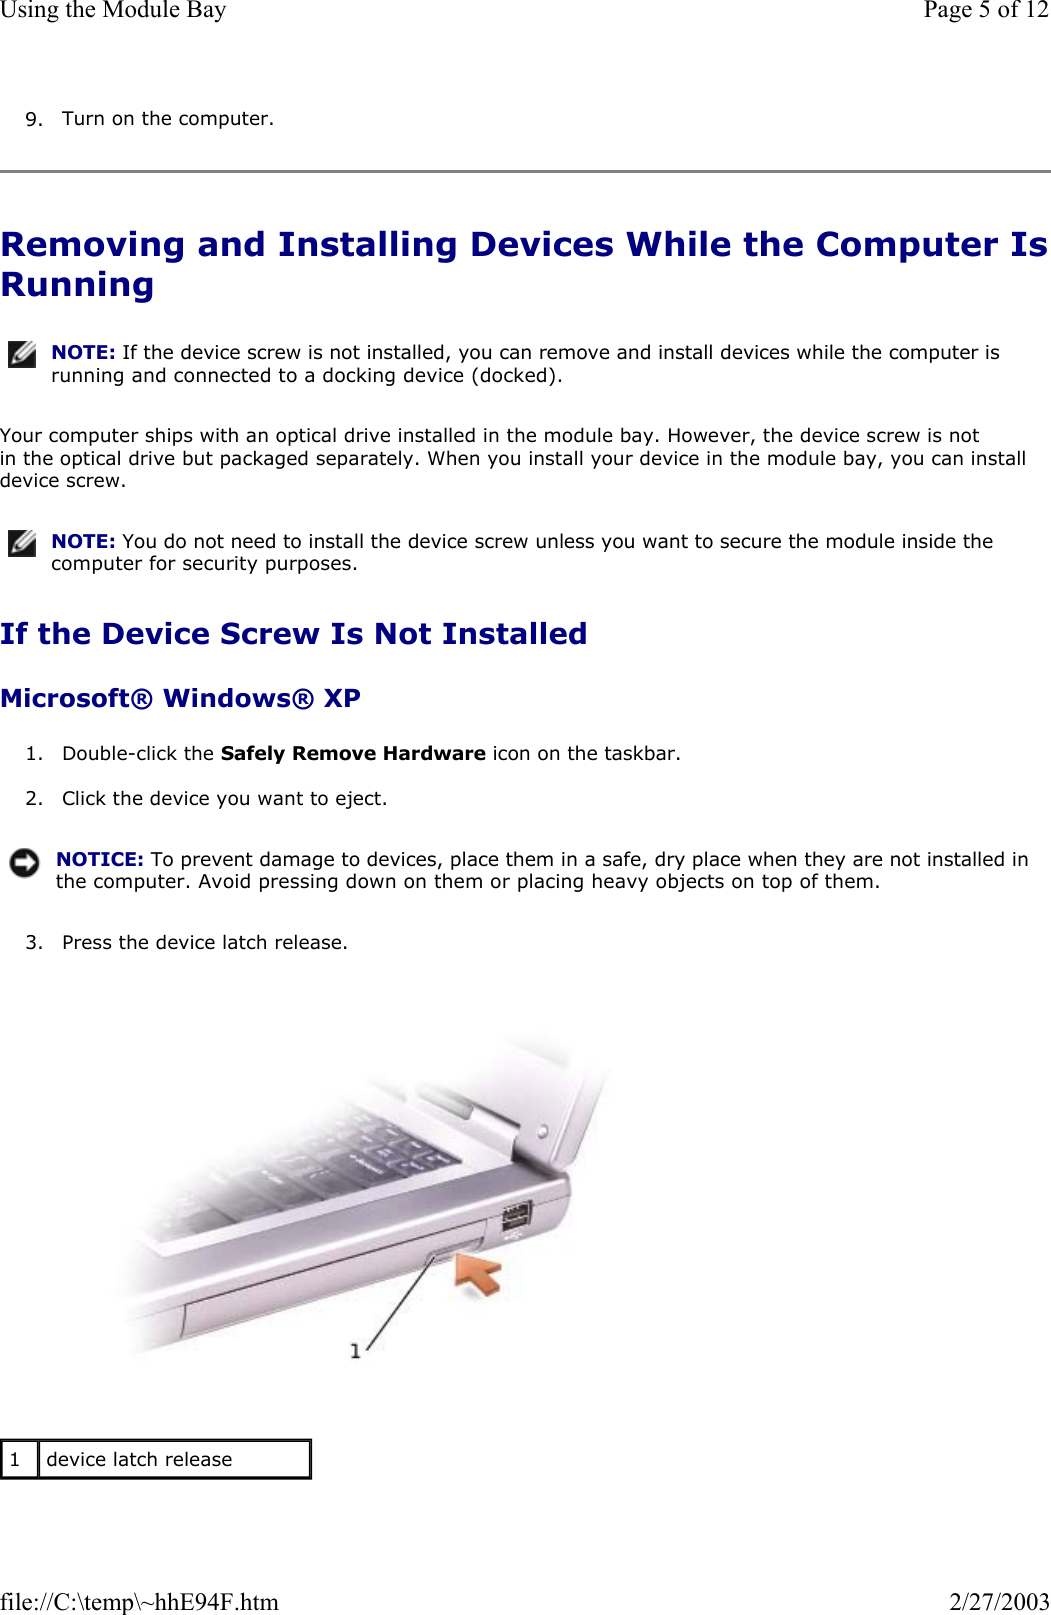 9. Turn on the computer.  Removing and Installing Devices While the Computer IsRunning Your computer ships with an optical drive installed in the module bay. However, the device screw is not in the optical drive but packaged separately. When you install your device in the module bay, you can install device screw. If the Device Screw Is Not Installed Microsoft® Windows® XP 1. Double-click the Safely Remove Hardware icon on the taskbar.  2. Click the device you want to eject.  3. Press the device latch release.    NOTE: If the device screw is not installed, you can remove and install devices while the computer is running and connected to a docking device (docked).NOTE: You do not need to install the device screw unless you want to secure the module inside the computer for security purposes.NOTICE: To prevent damage to devices, place them in a safe, dry place when they are not installed in the computer. Avoid pressing down on them or placing heavy objects on top of them.1  device latch release Page 5 of 12Using the Module Bay2/27/2003file://C:\temp\~hhE94F.htm